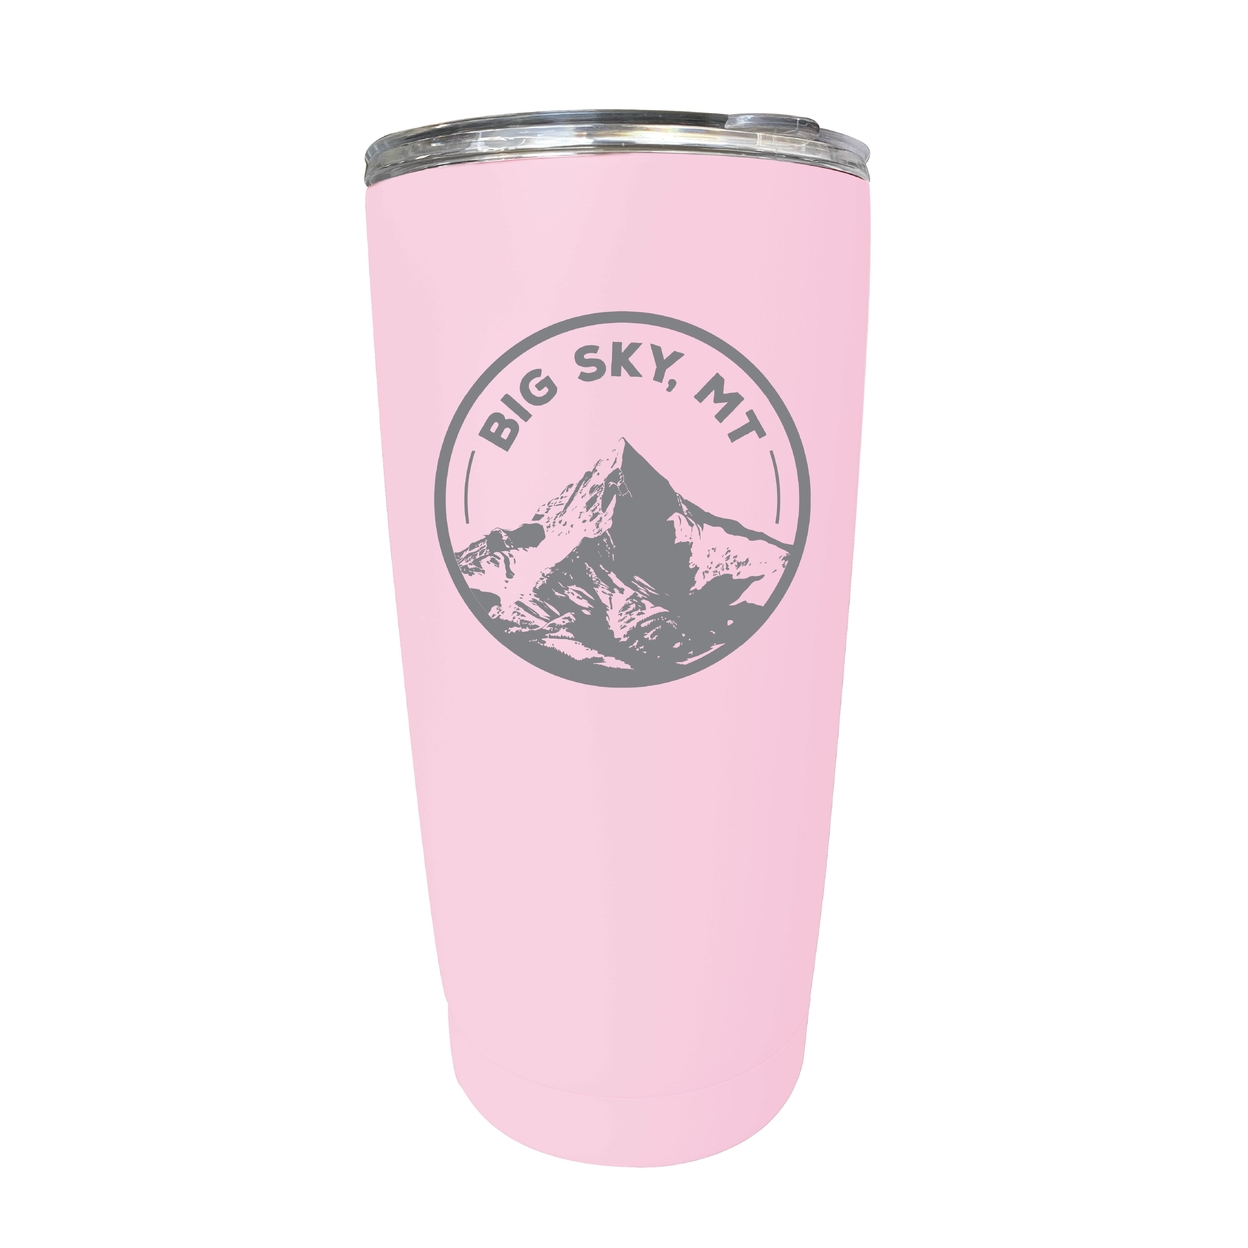 Big Sky Montana Souvenir 16 Oz Engraved Stainless Steel Insulated Tumbler - Pink,,4-Pack